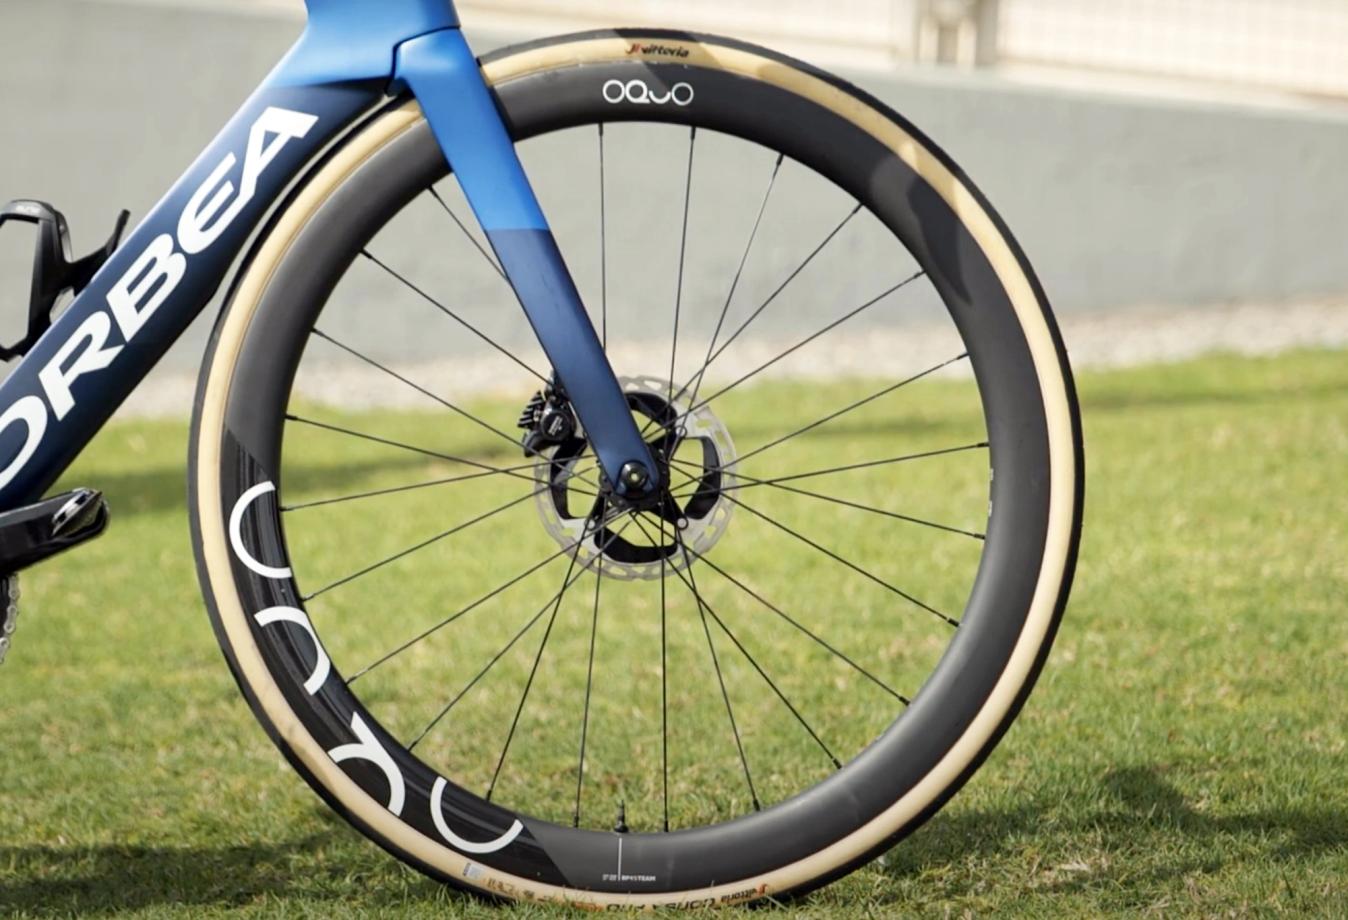 Oquo is Orbea's in-house wheel brand